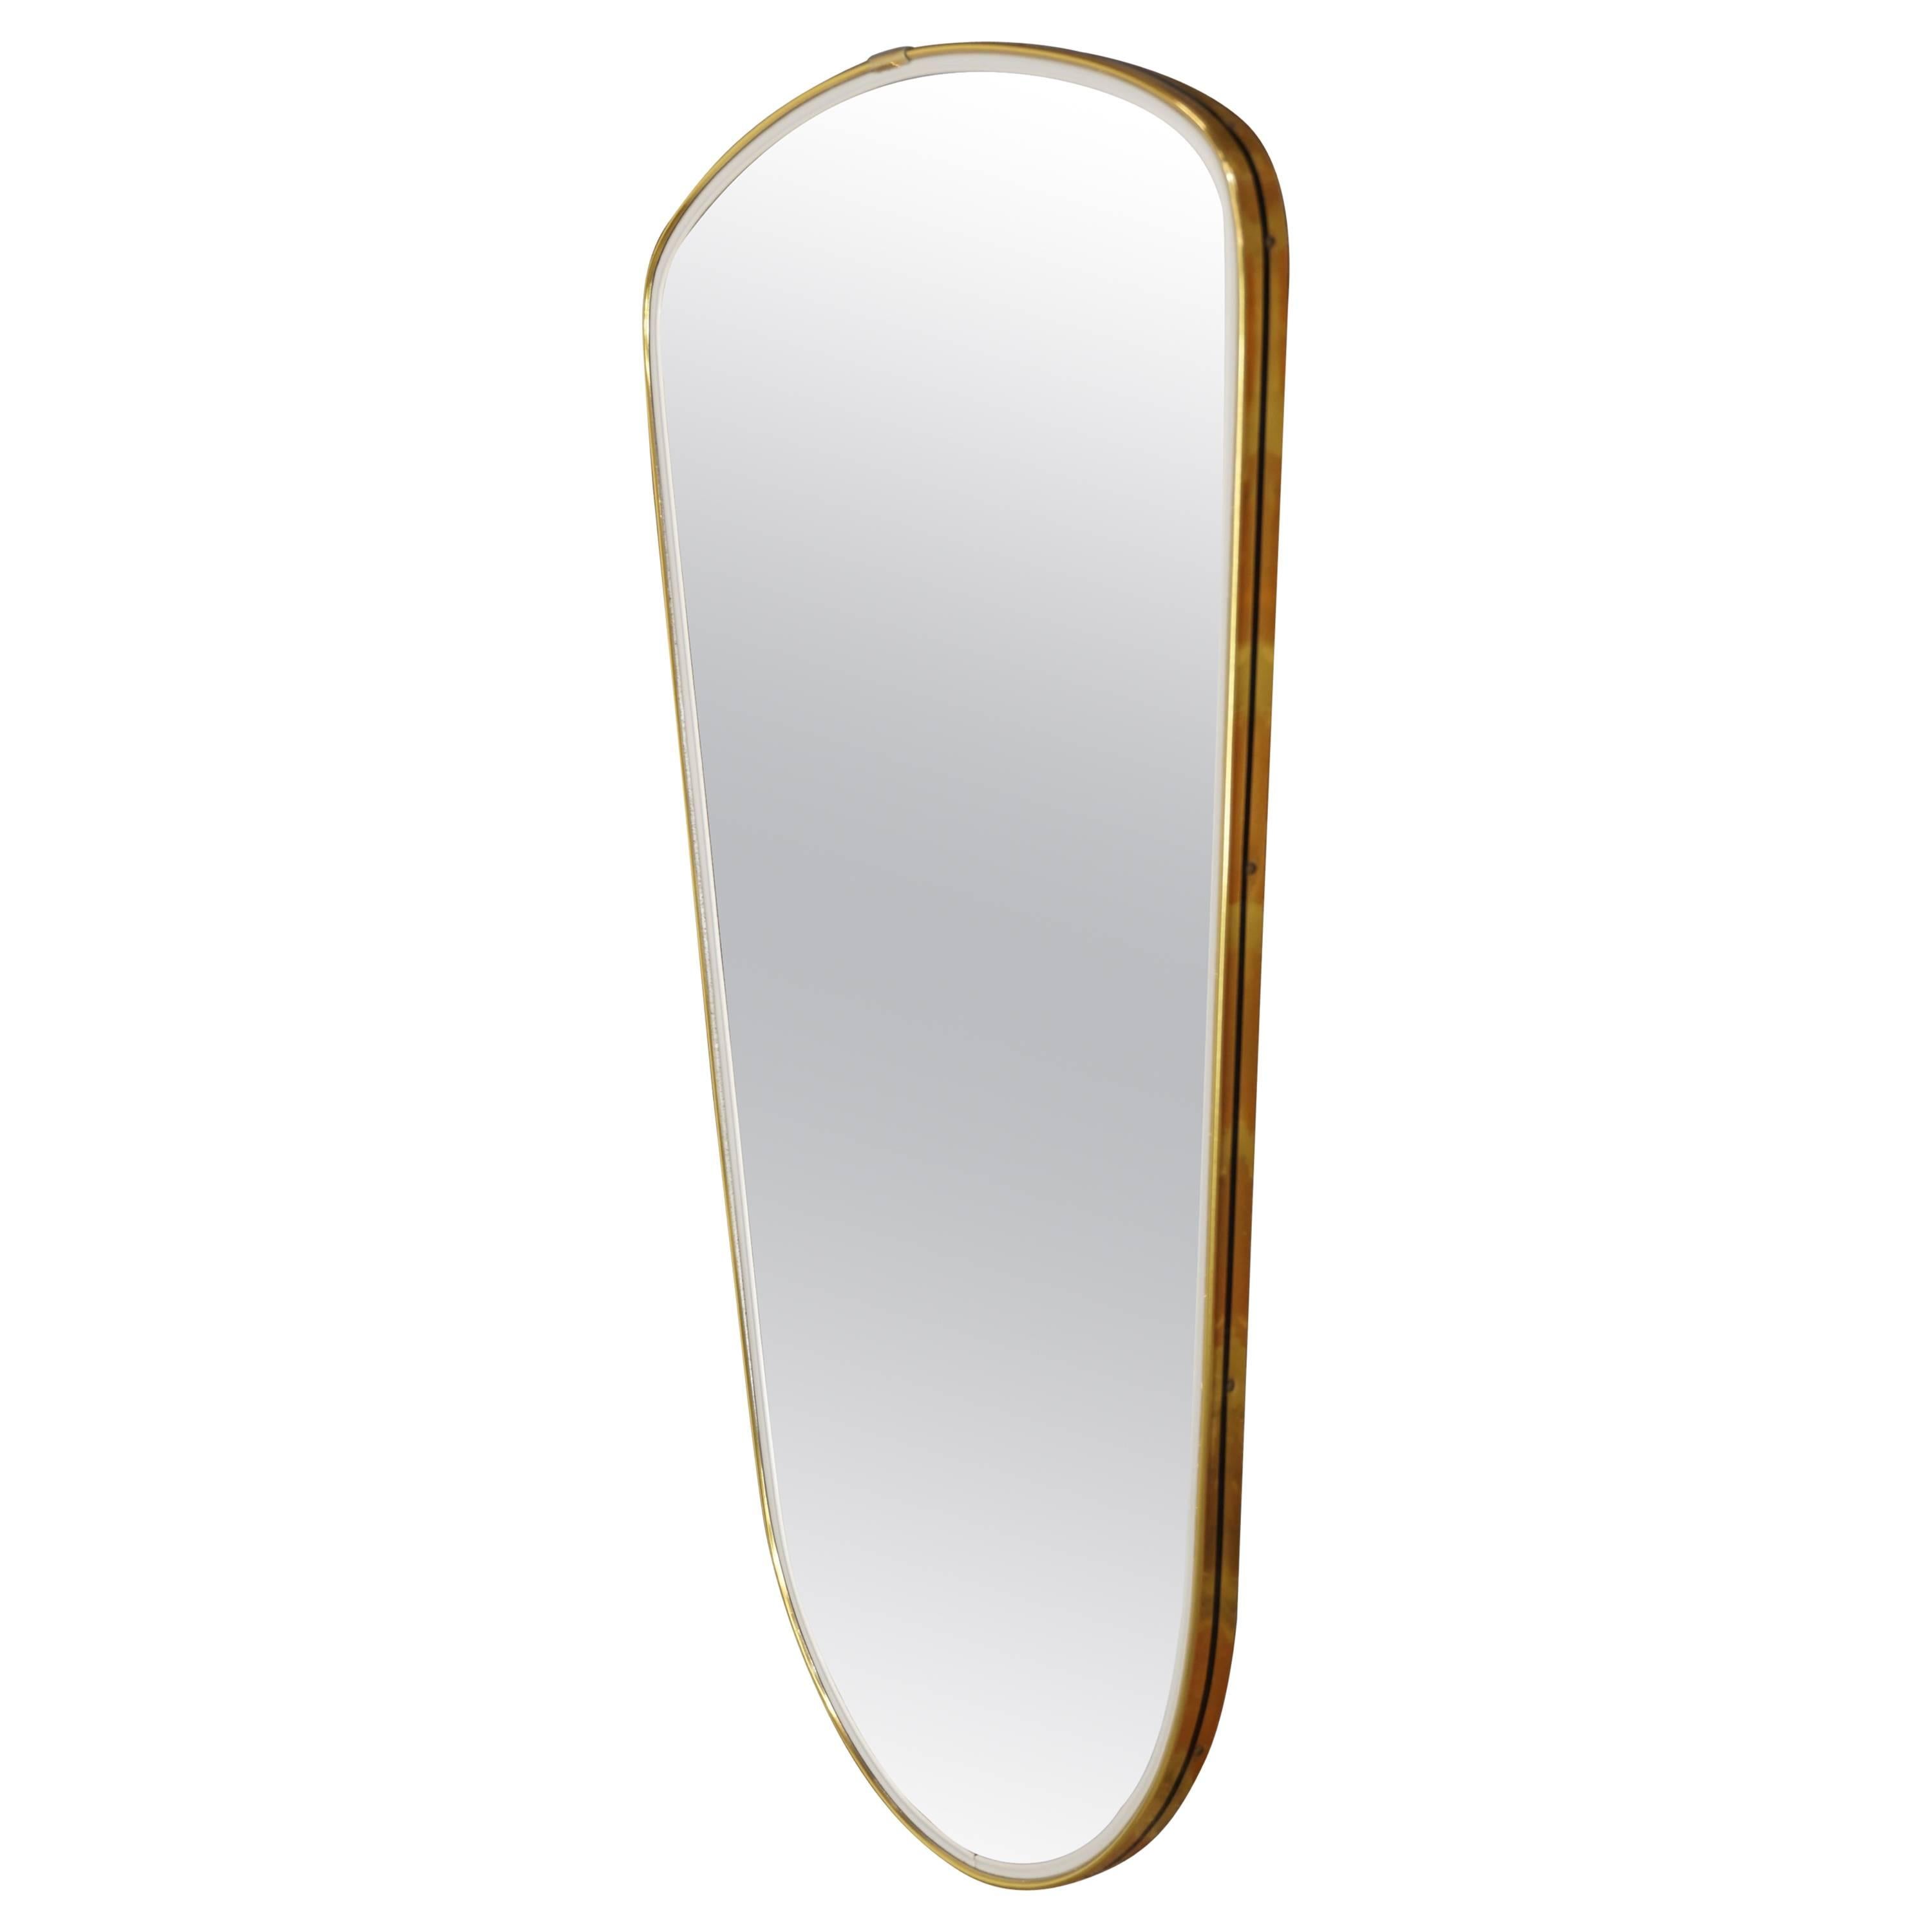 Black and Gold Vintage Mirror